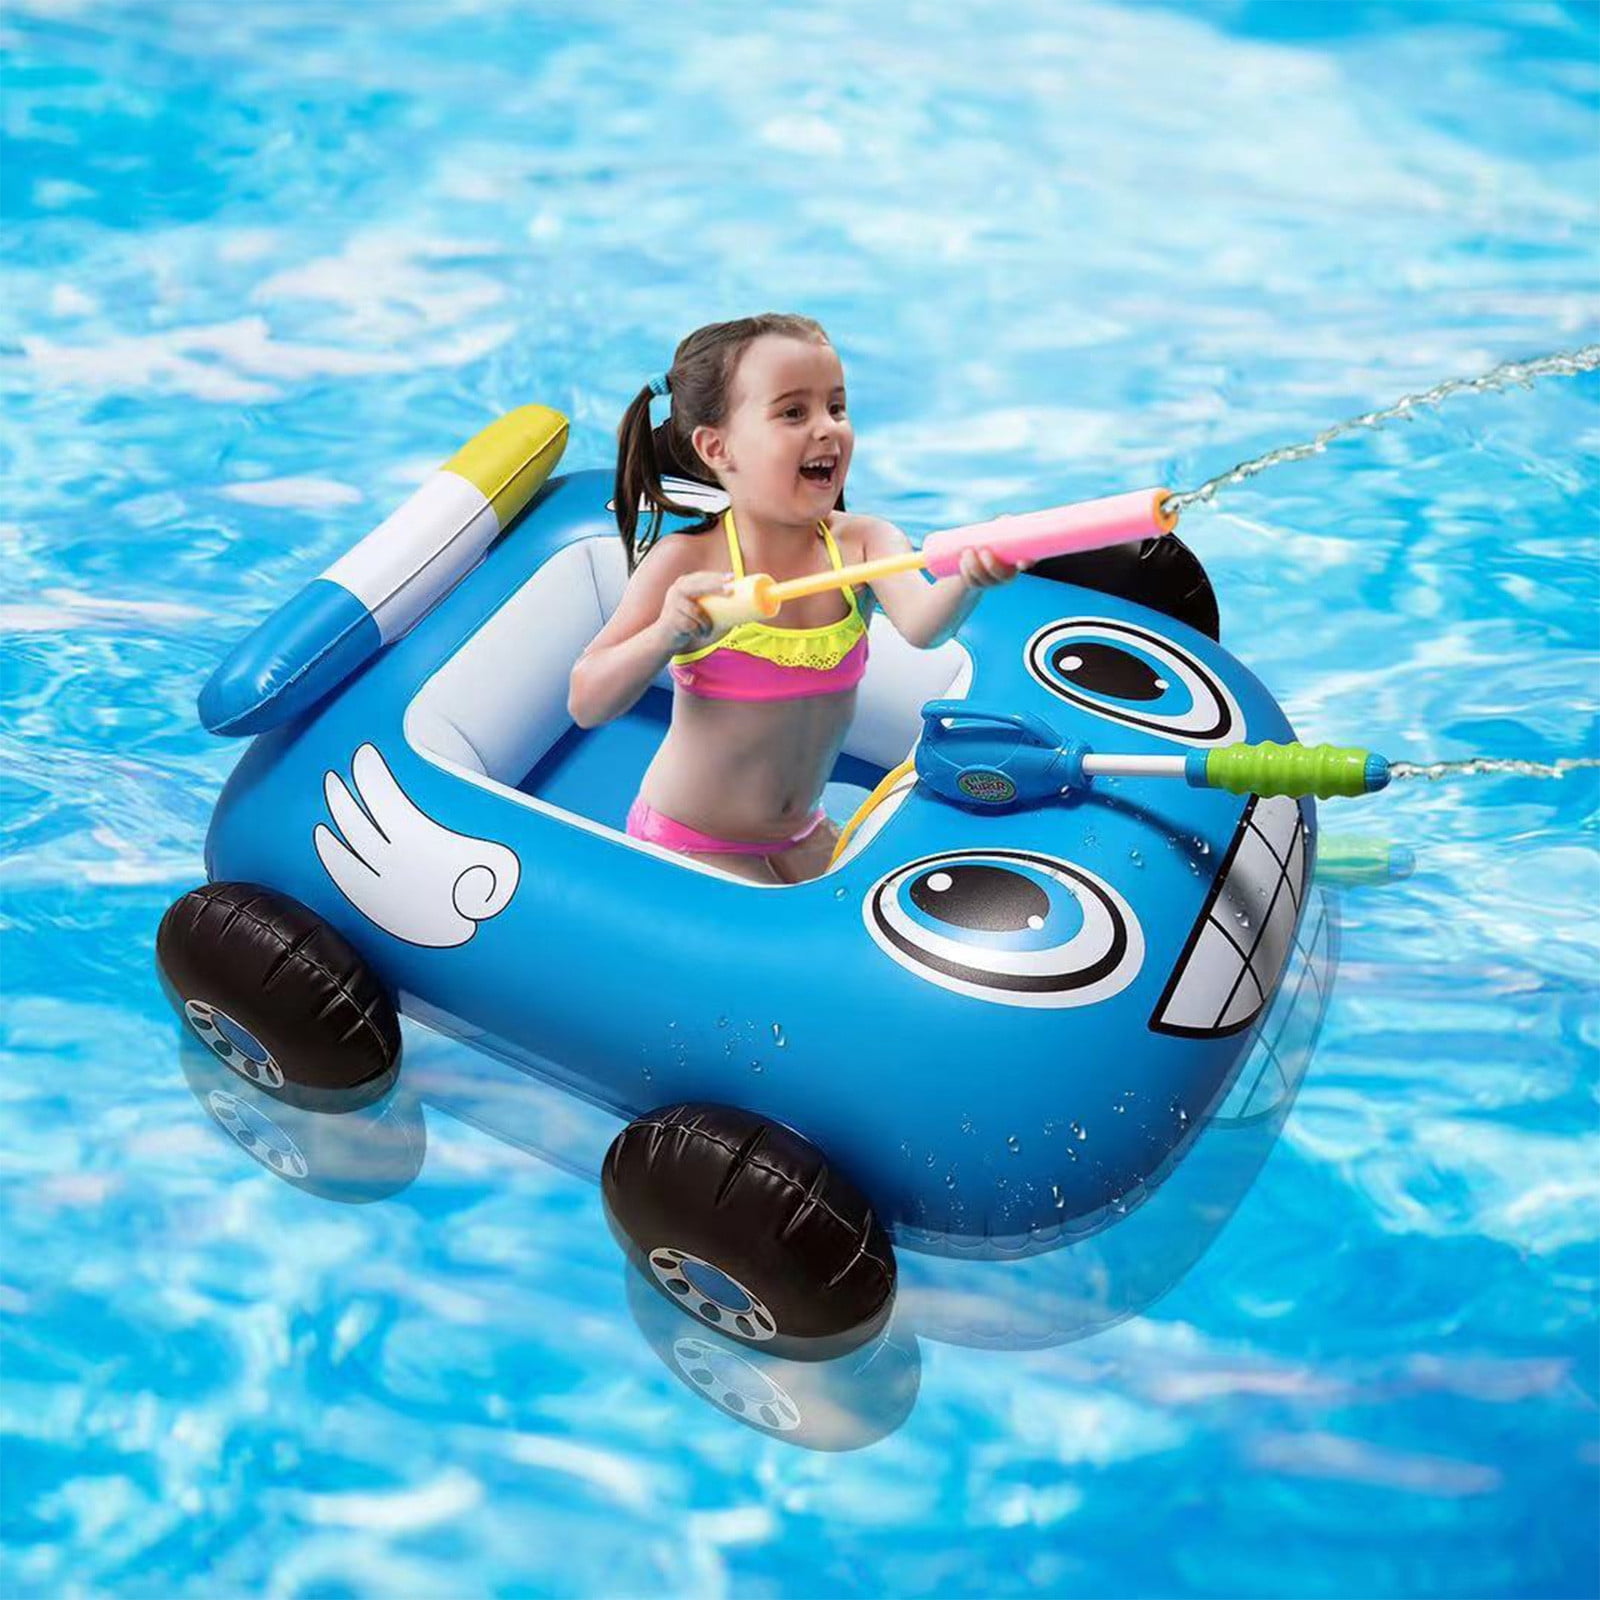 Toy Story Inflatable Boat Childrens Kids Dinghy Swimming Pool Raft Float Toy 